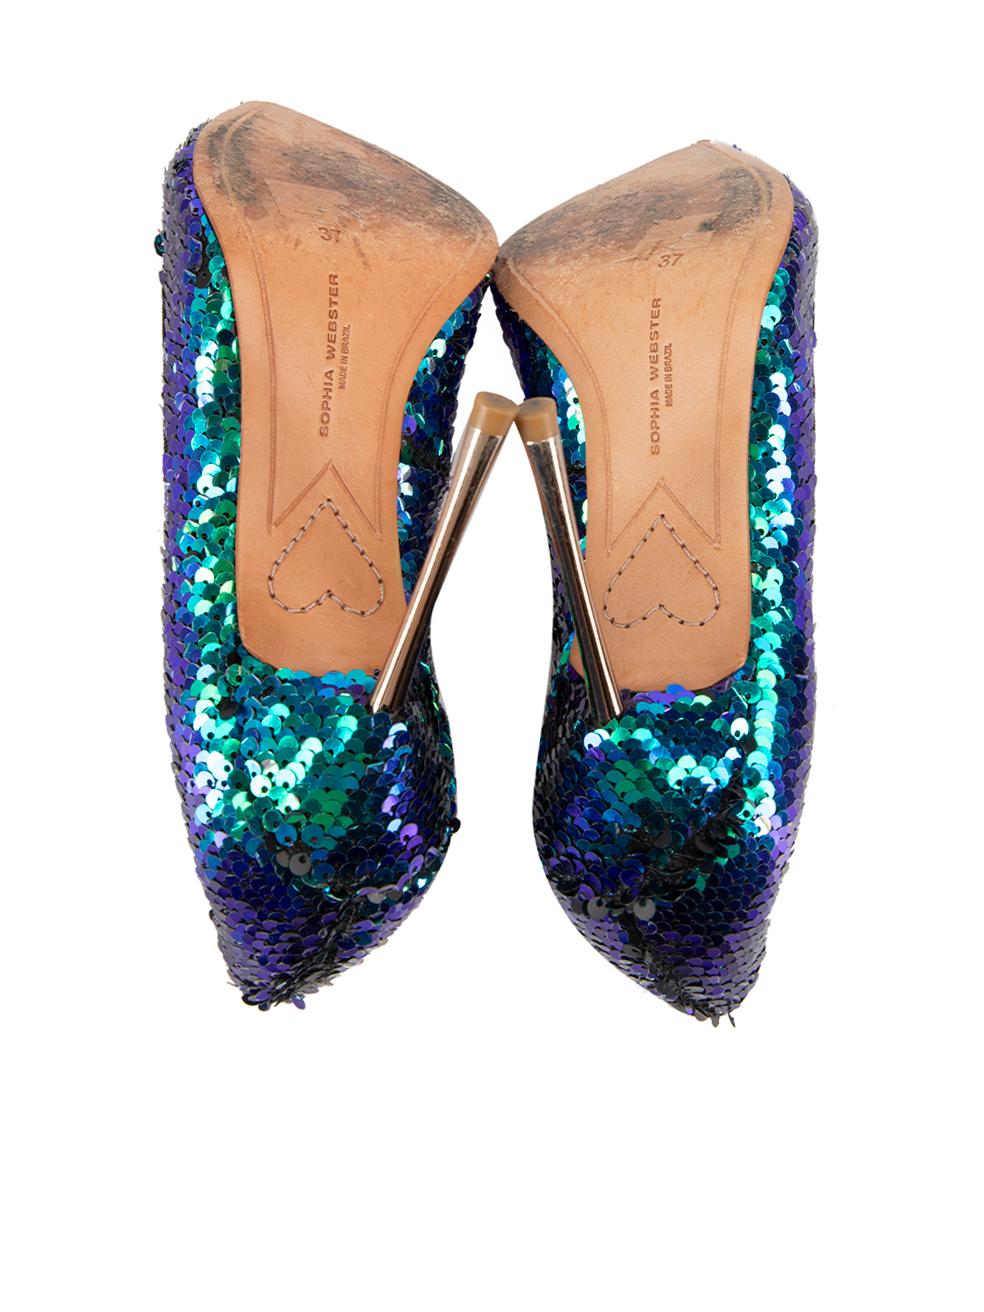 Sophia Webster Blue Sequinned Pointed Toe Pumps Size IT 37 1